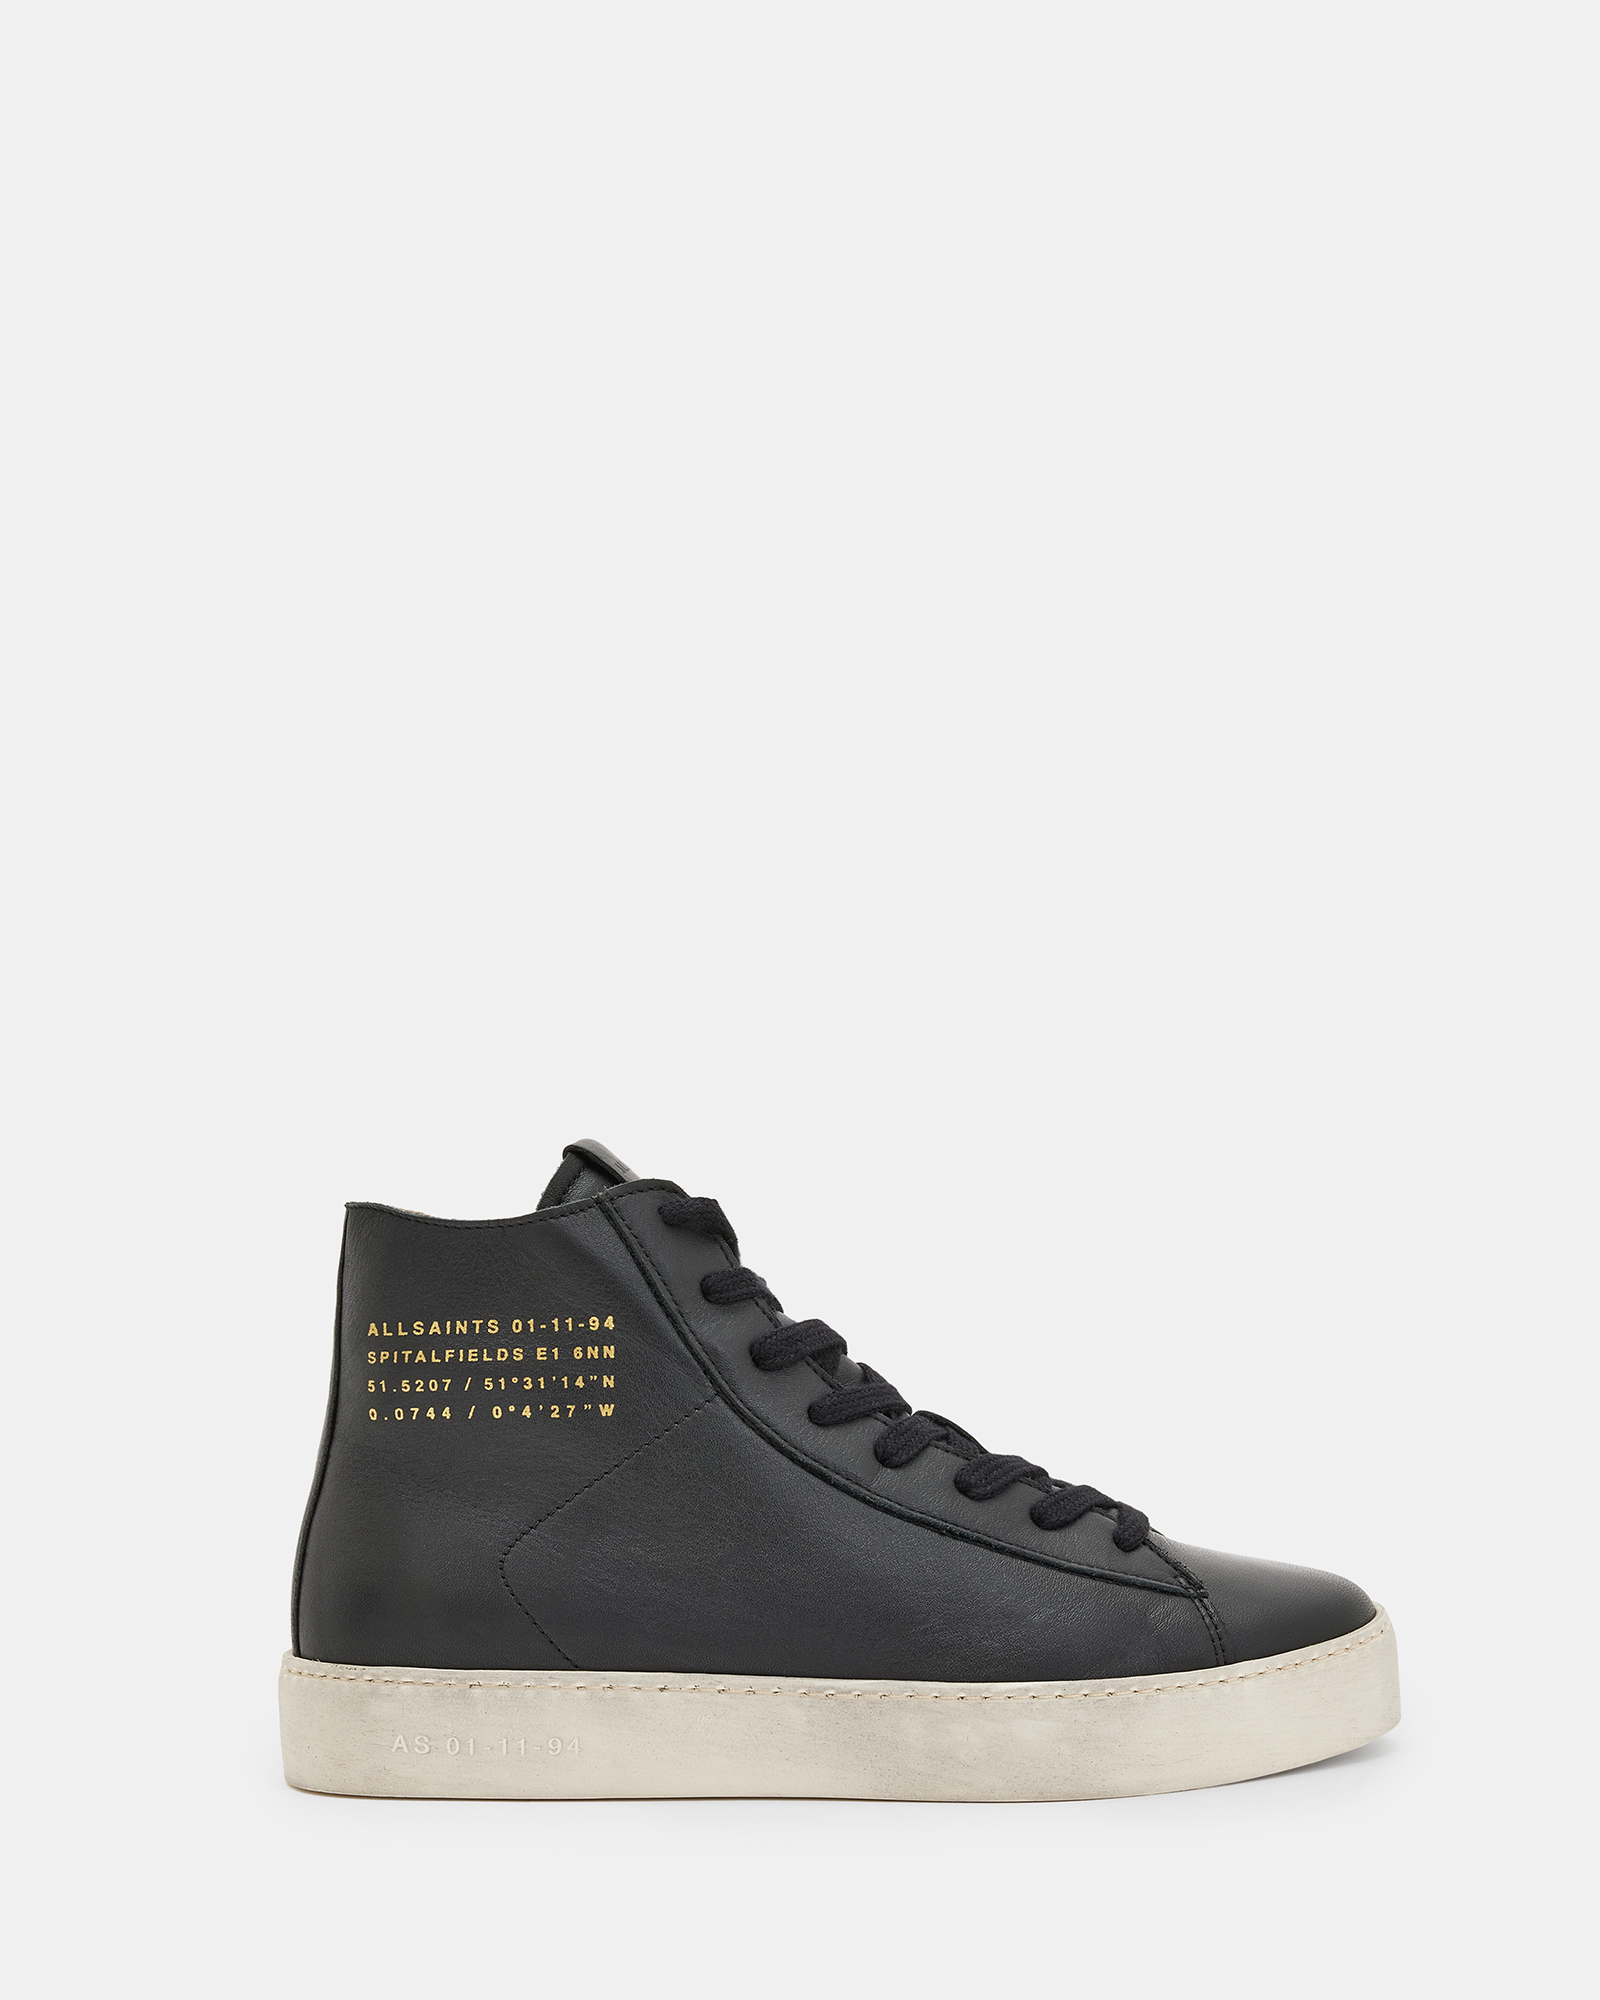 AllSaints Tana Leather High Top Trainers,, Black